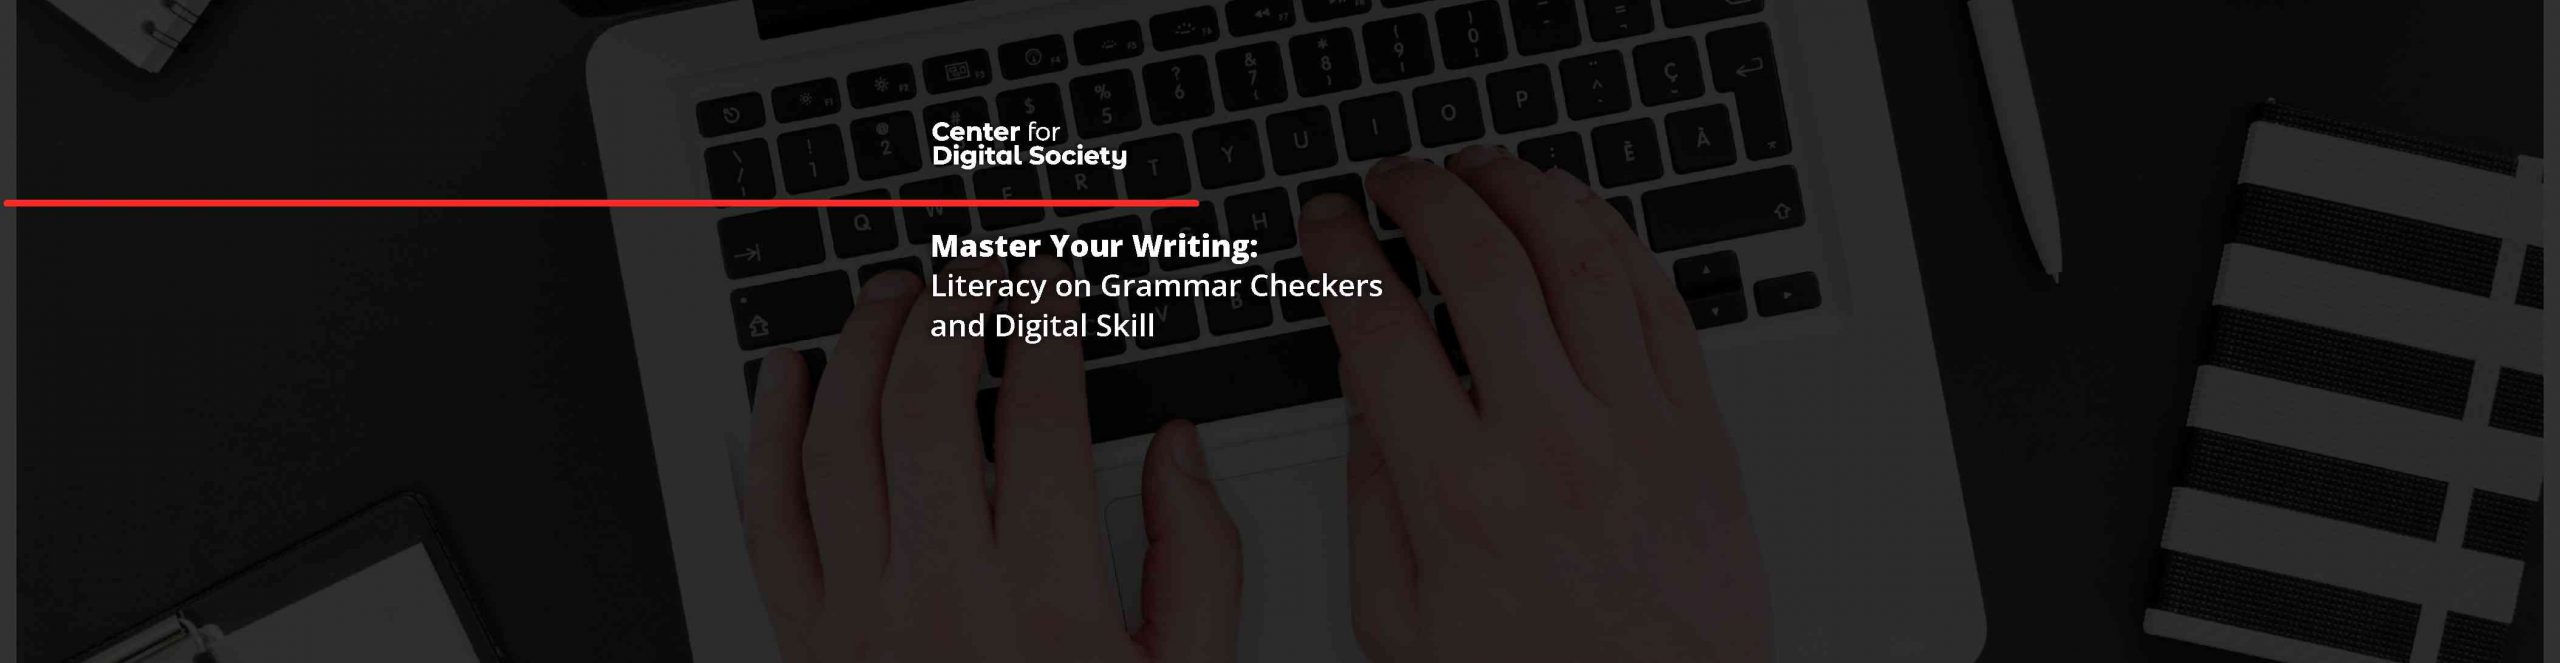 Master Your Writing: Literacy on Grammar Checkers and Digital Skill